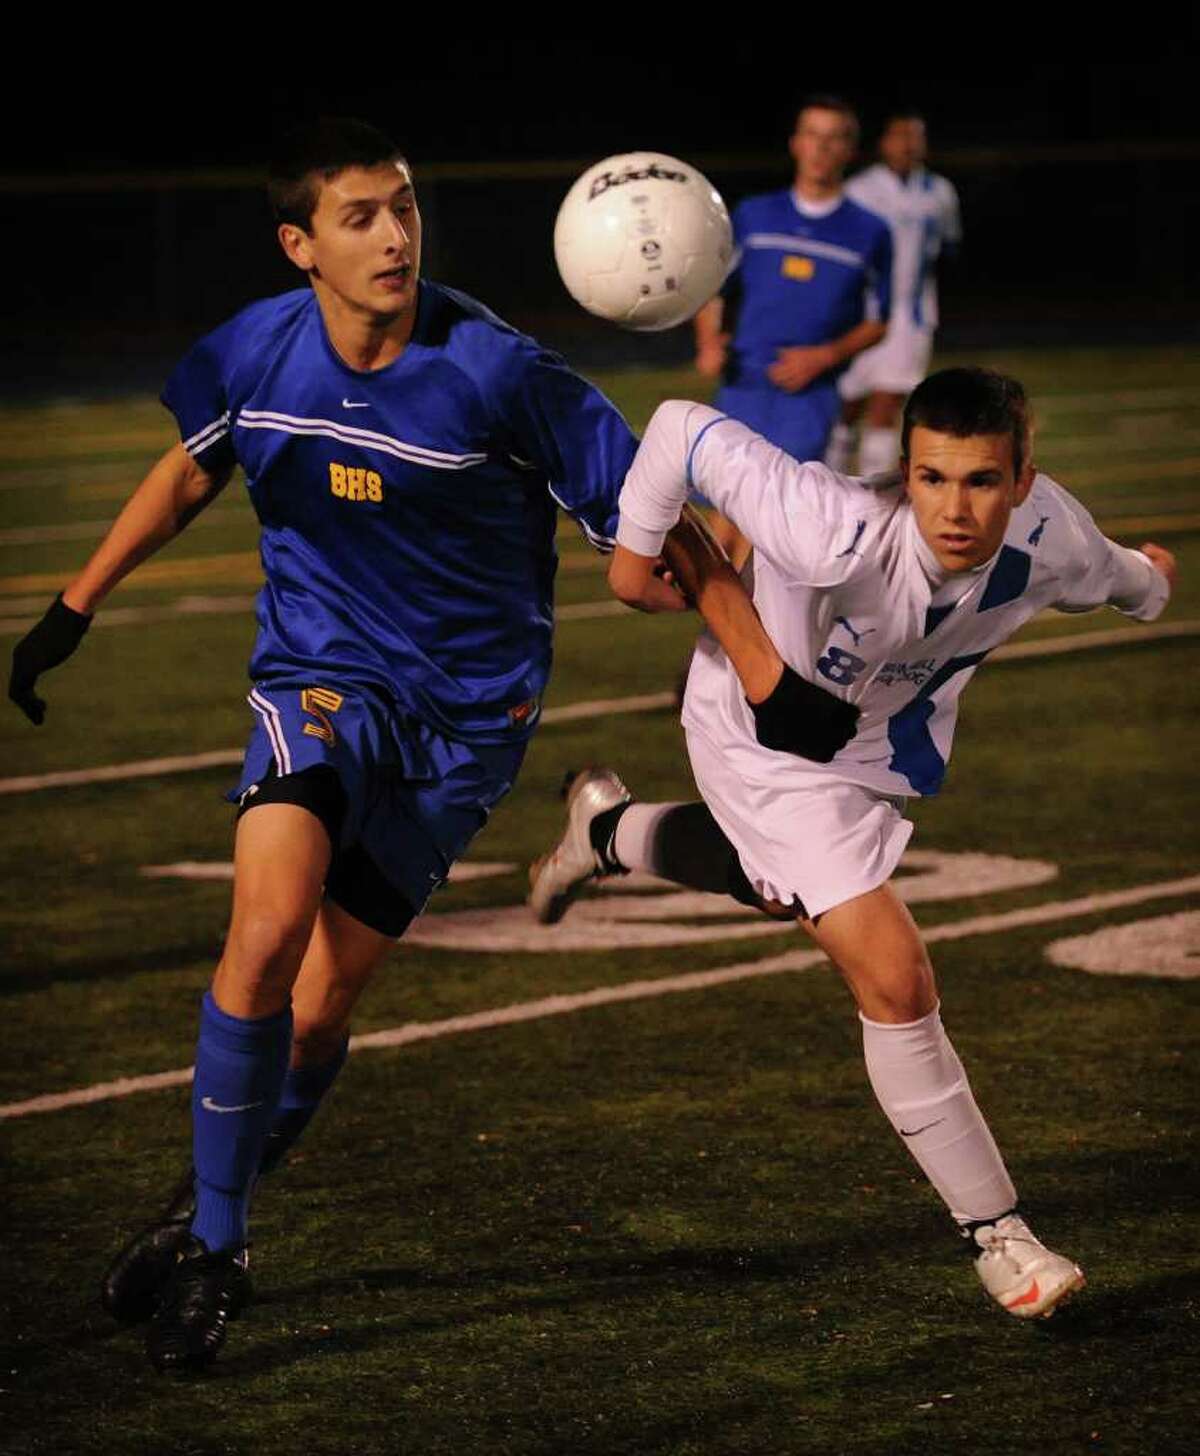 Brookfield's Austin Foulds, left, fights for control of the ball with Bunnell's James Gillespie during their Class L boys state tournament game at Bunnell High School in Stratford on Monday, November 15, 2010. Bunnell won the game on penalty kicks 5-3.